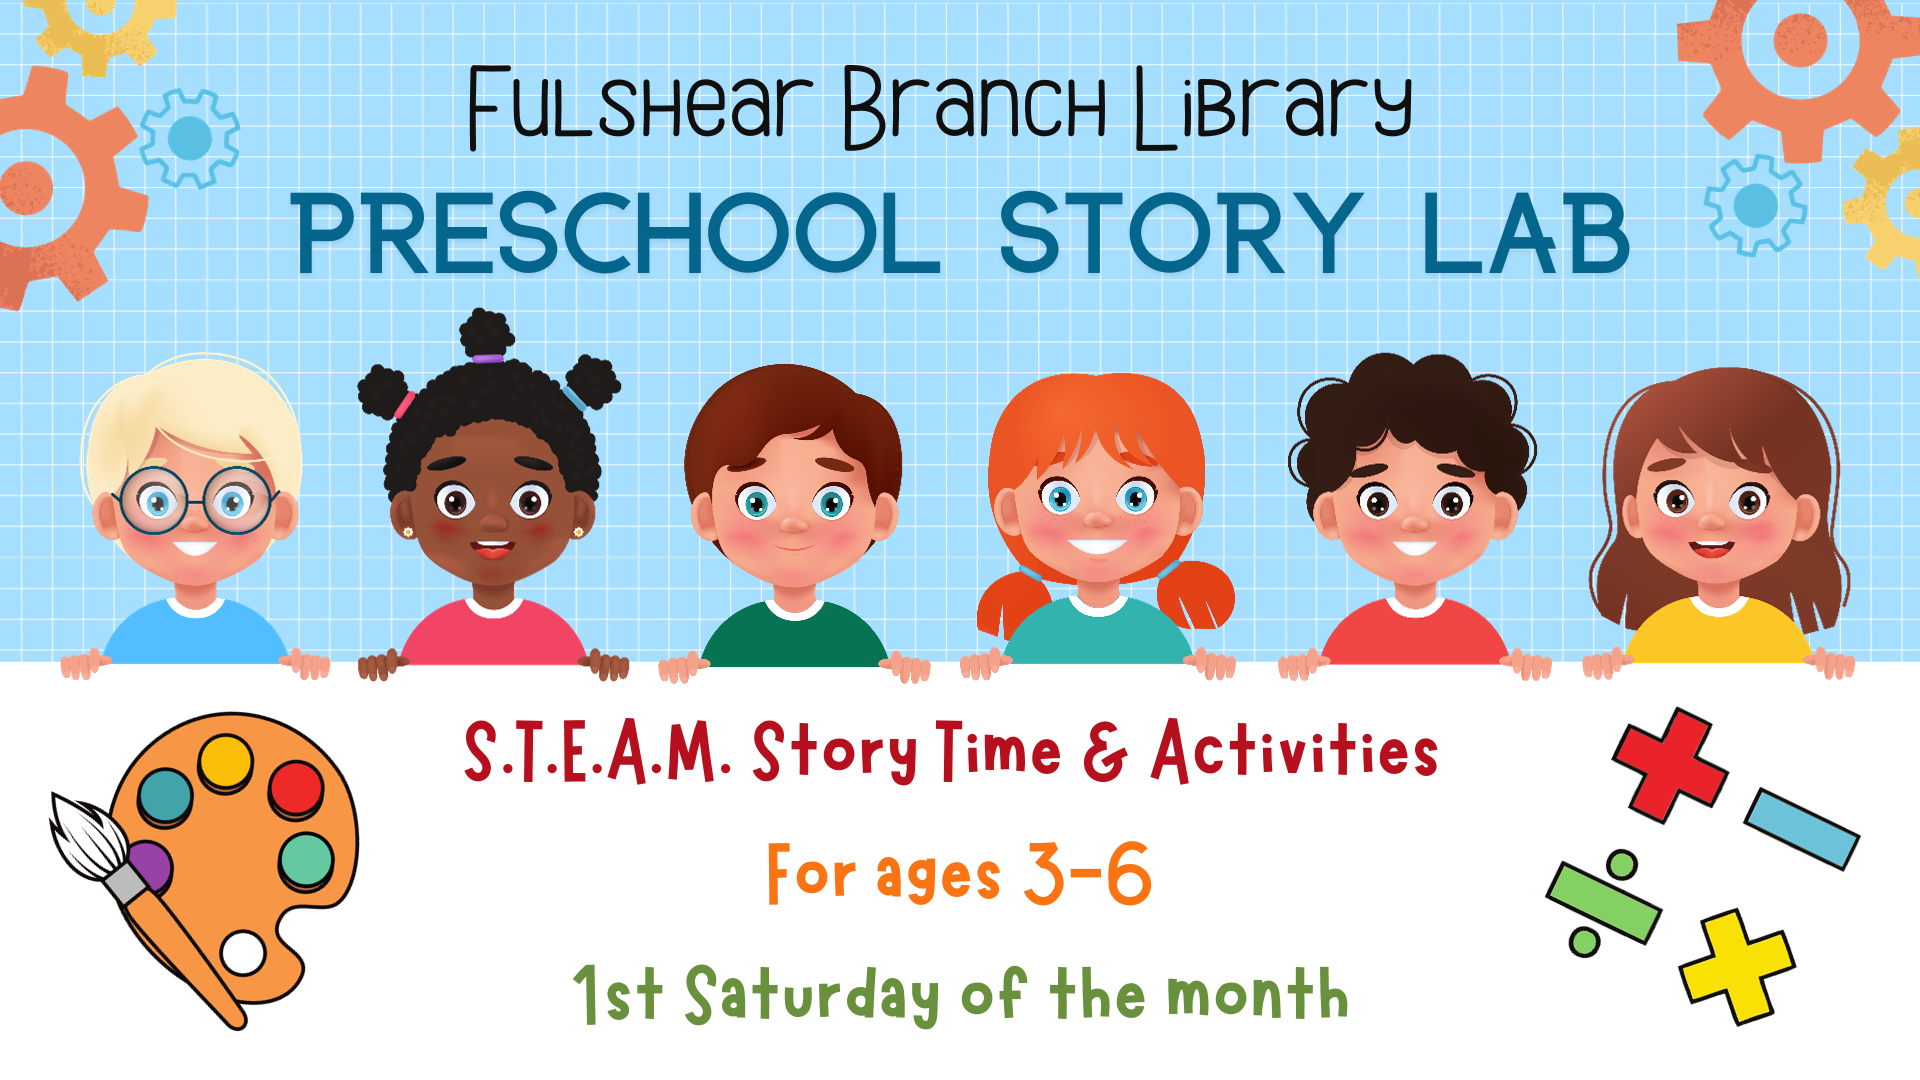 Fulshear Branch Library Preschool Story Lab S.T.E.A.M. Story time & activities for ages 3-6 1st Saturday of the month